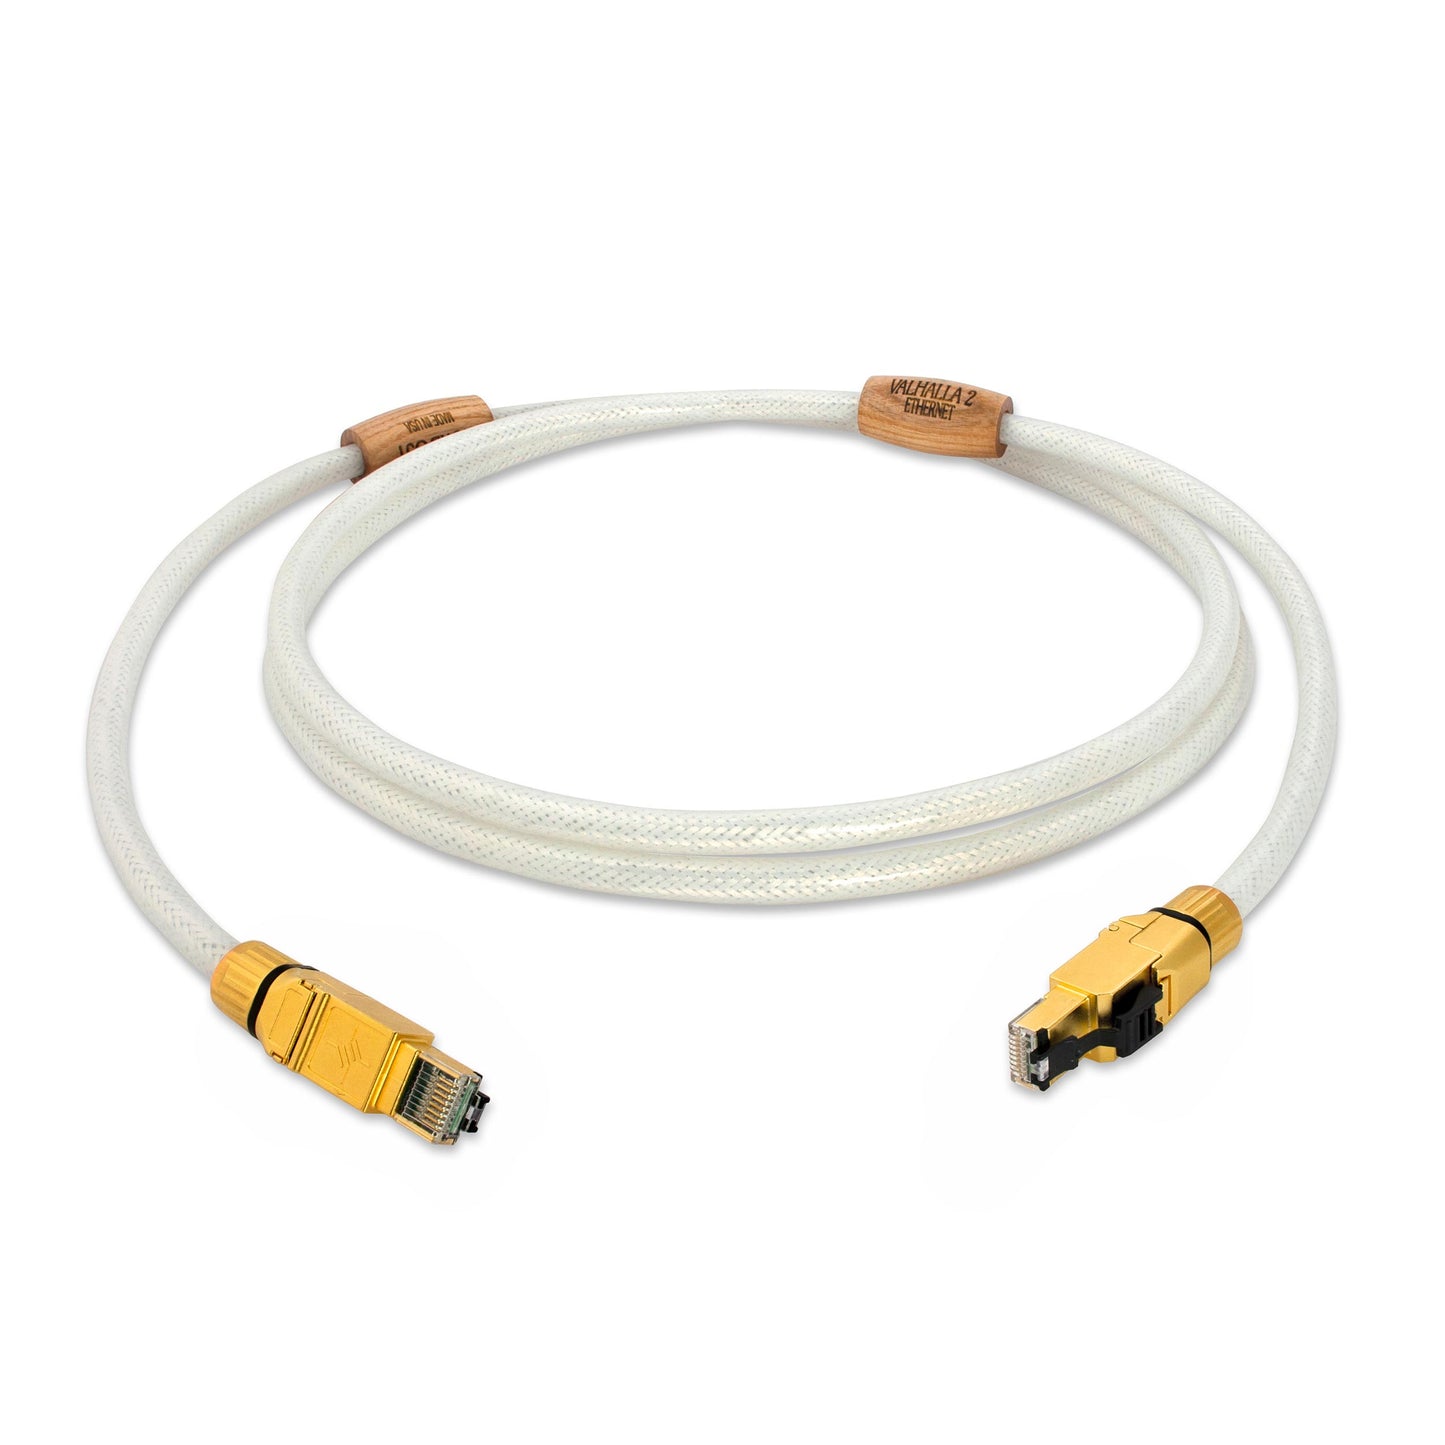 Nordost Valhalla 2 Reference Ethernet Cable